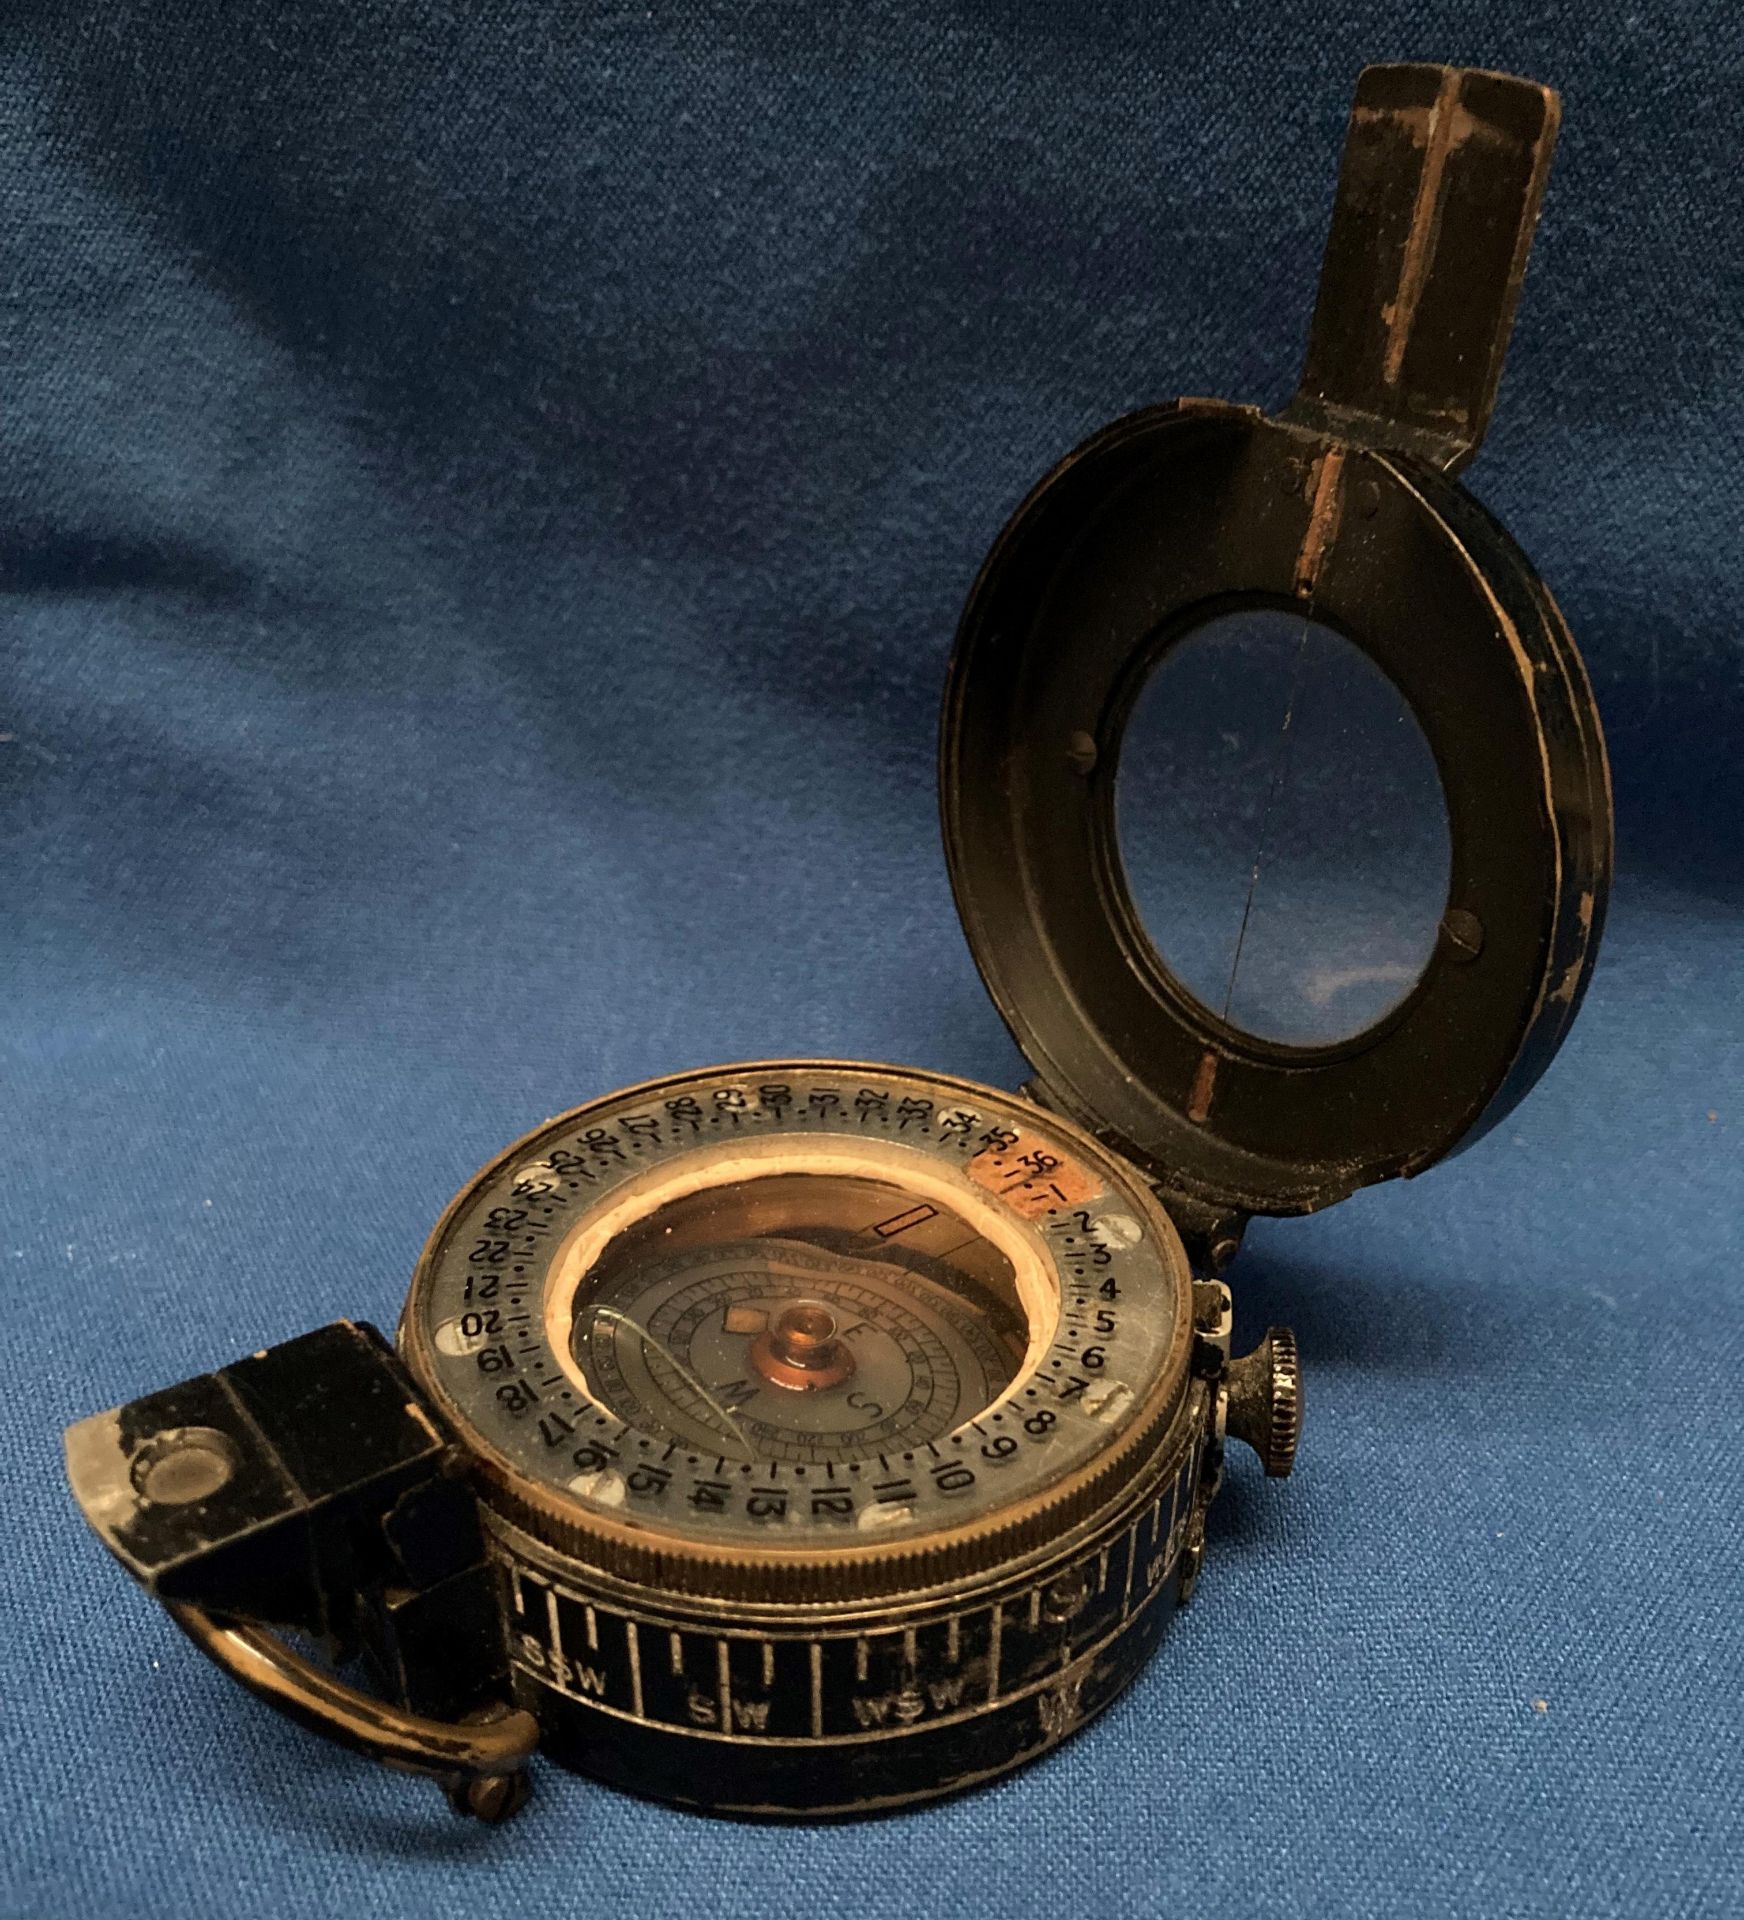 ATG Co Ltd London 1940 Mark III metal and brass naval compass no. - Image 4 of 5